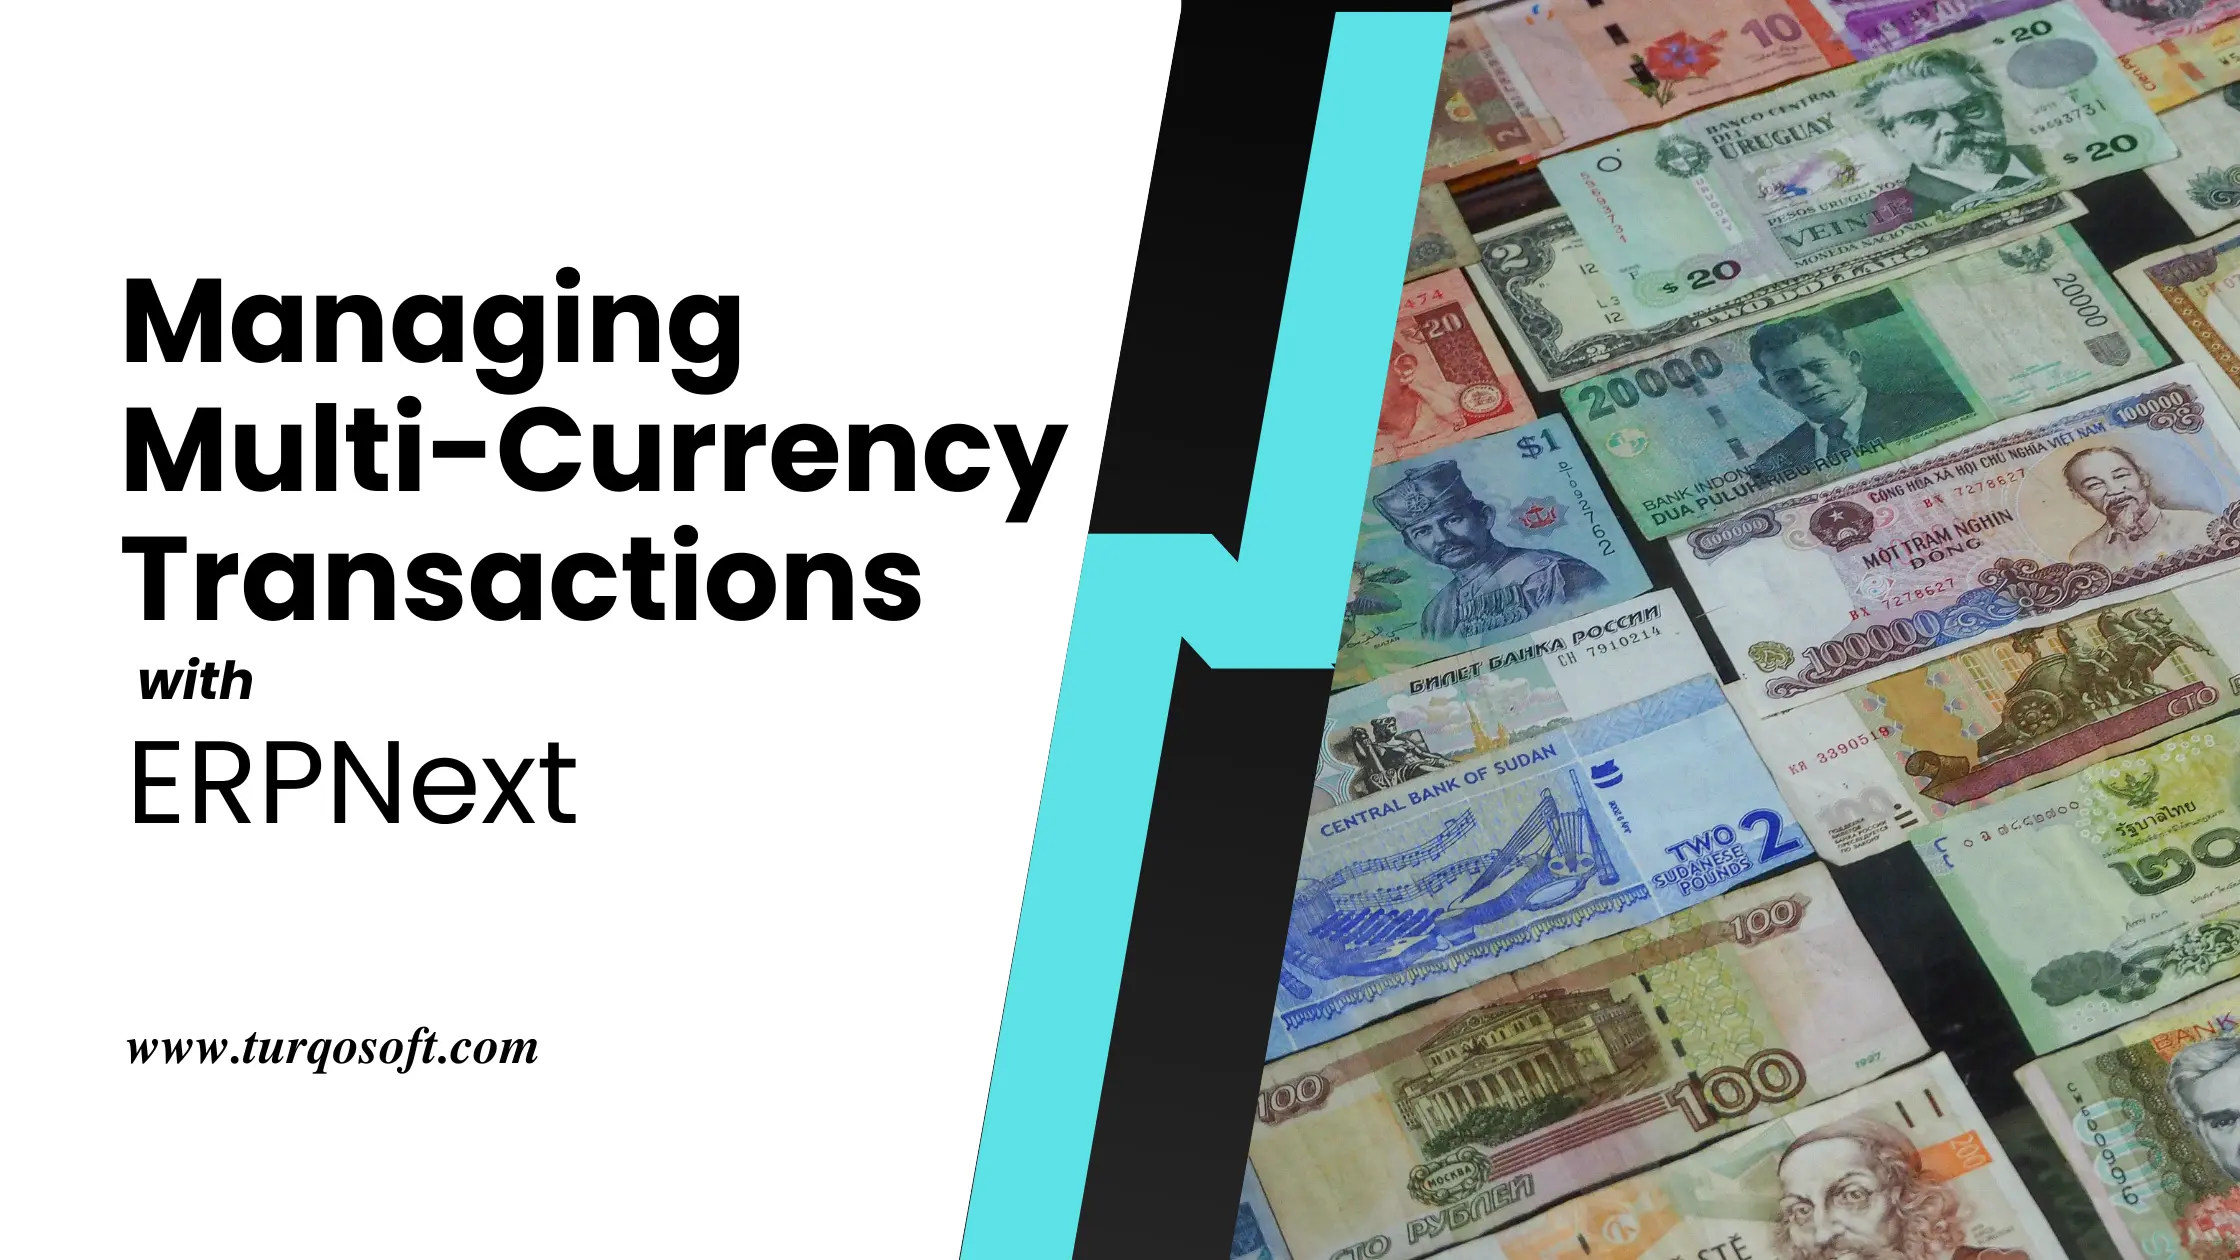 ERPNext for International Business - Navigating through Managing Multi-Currency and Multi-Language Options